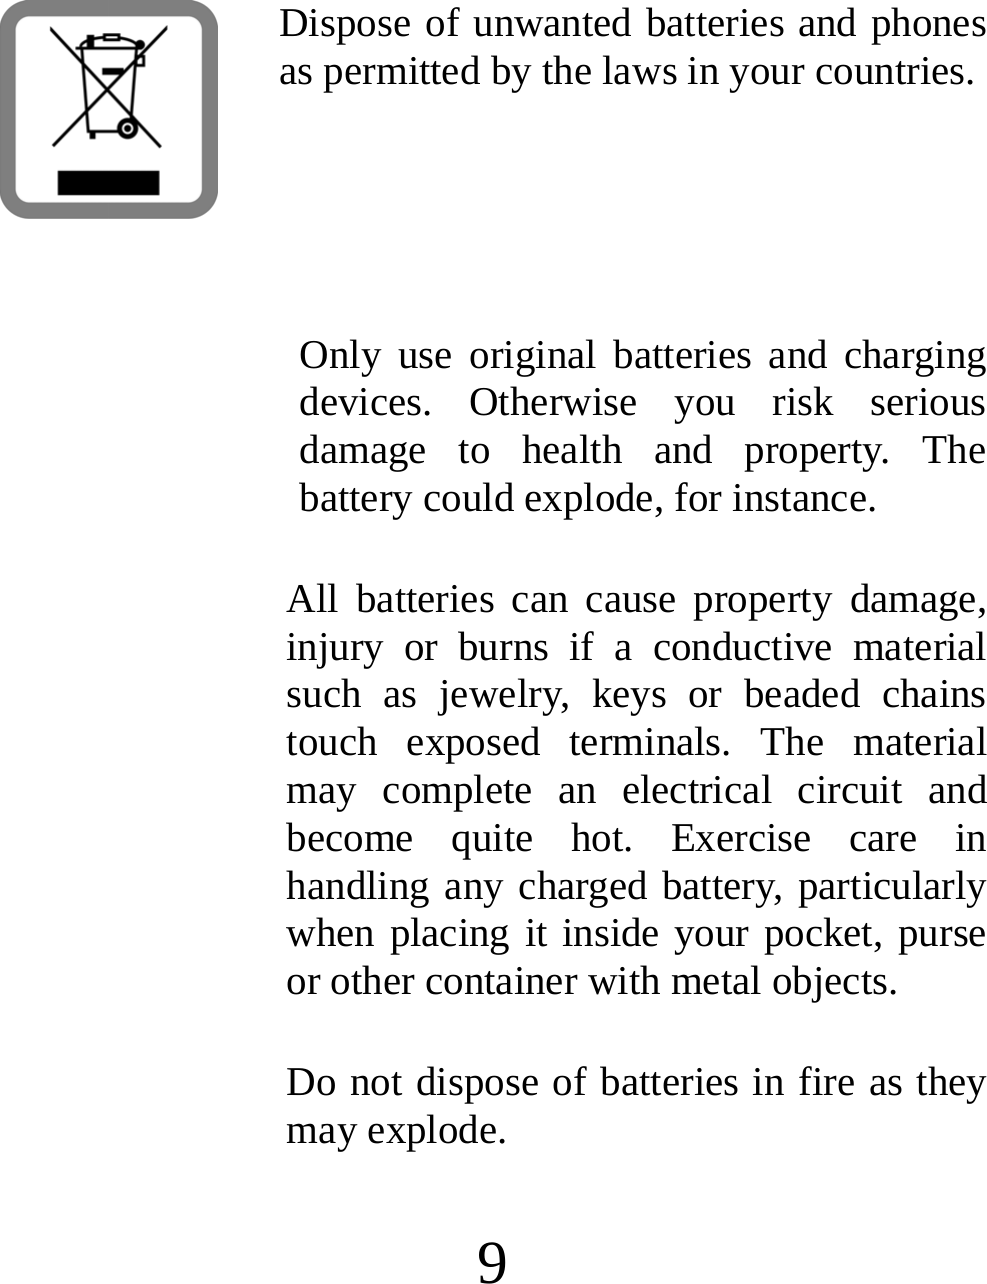  9  Dispose of unwanted batteries and phones as permitted by the laws in your countries.   Only use original batteries and charging devices. Otherwise you risk serious damage to health and property. The battery could explode, for instance. All batteries can cause property damage, injury or burns if a conductive material such as jewelry, keys or beaded chains touch exposed terminals. The material may complete an electrical circuit and become quite hot. Exercise care in handling any charged battery, particularly when placing it inside your pocket, purse or other container with metal objects. Do not dispose of batteries in fire as they may explode. 